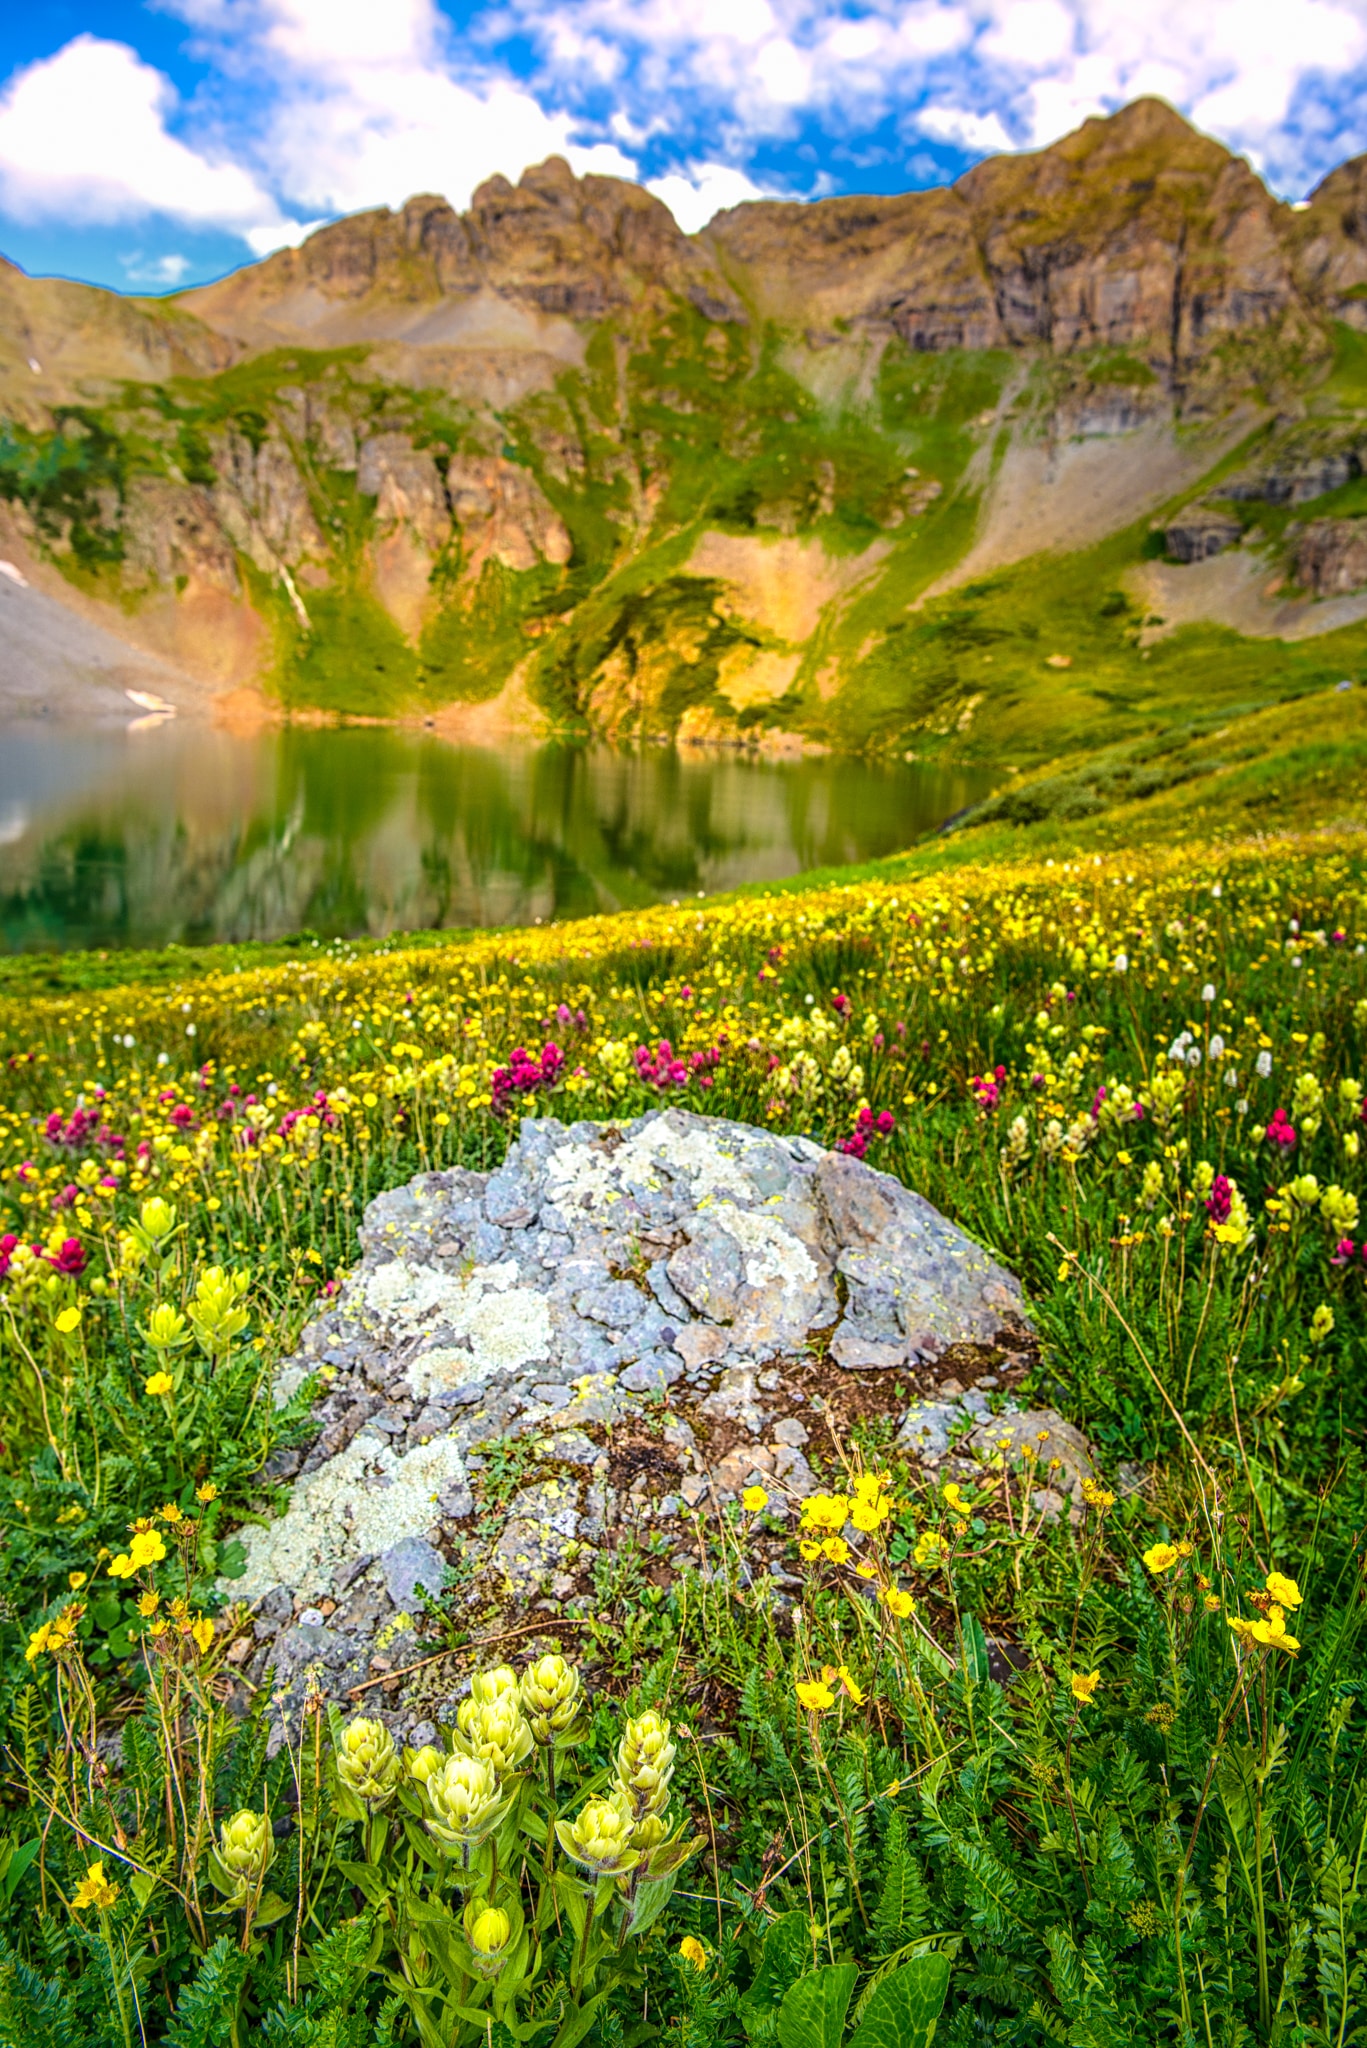 A collection of Alpine Paintbrush and Avens grow along the shore of Clear Lake, a hanging lake below Peak 13309 at the end of FS 815, located in the mountains between Ouray and Silverton, Colorado.